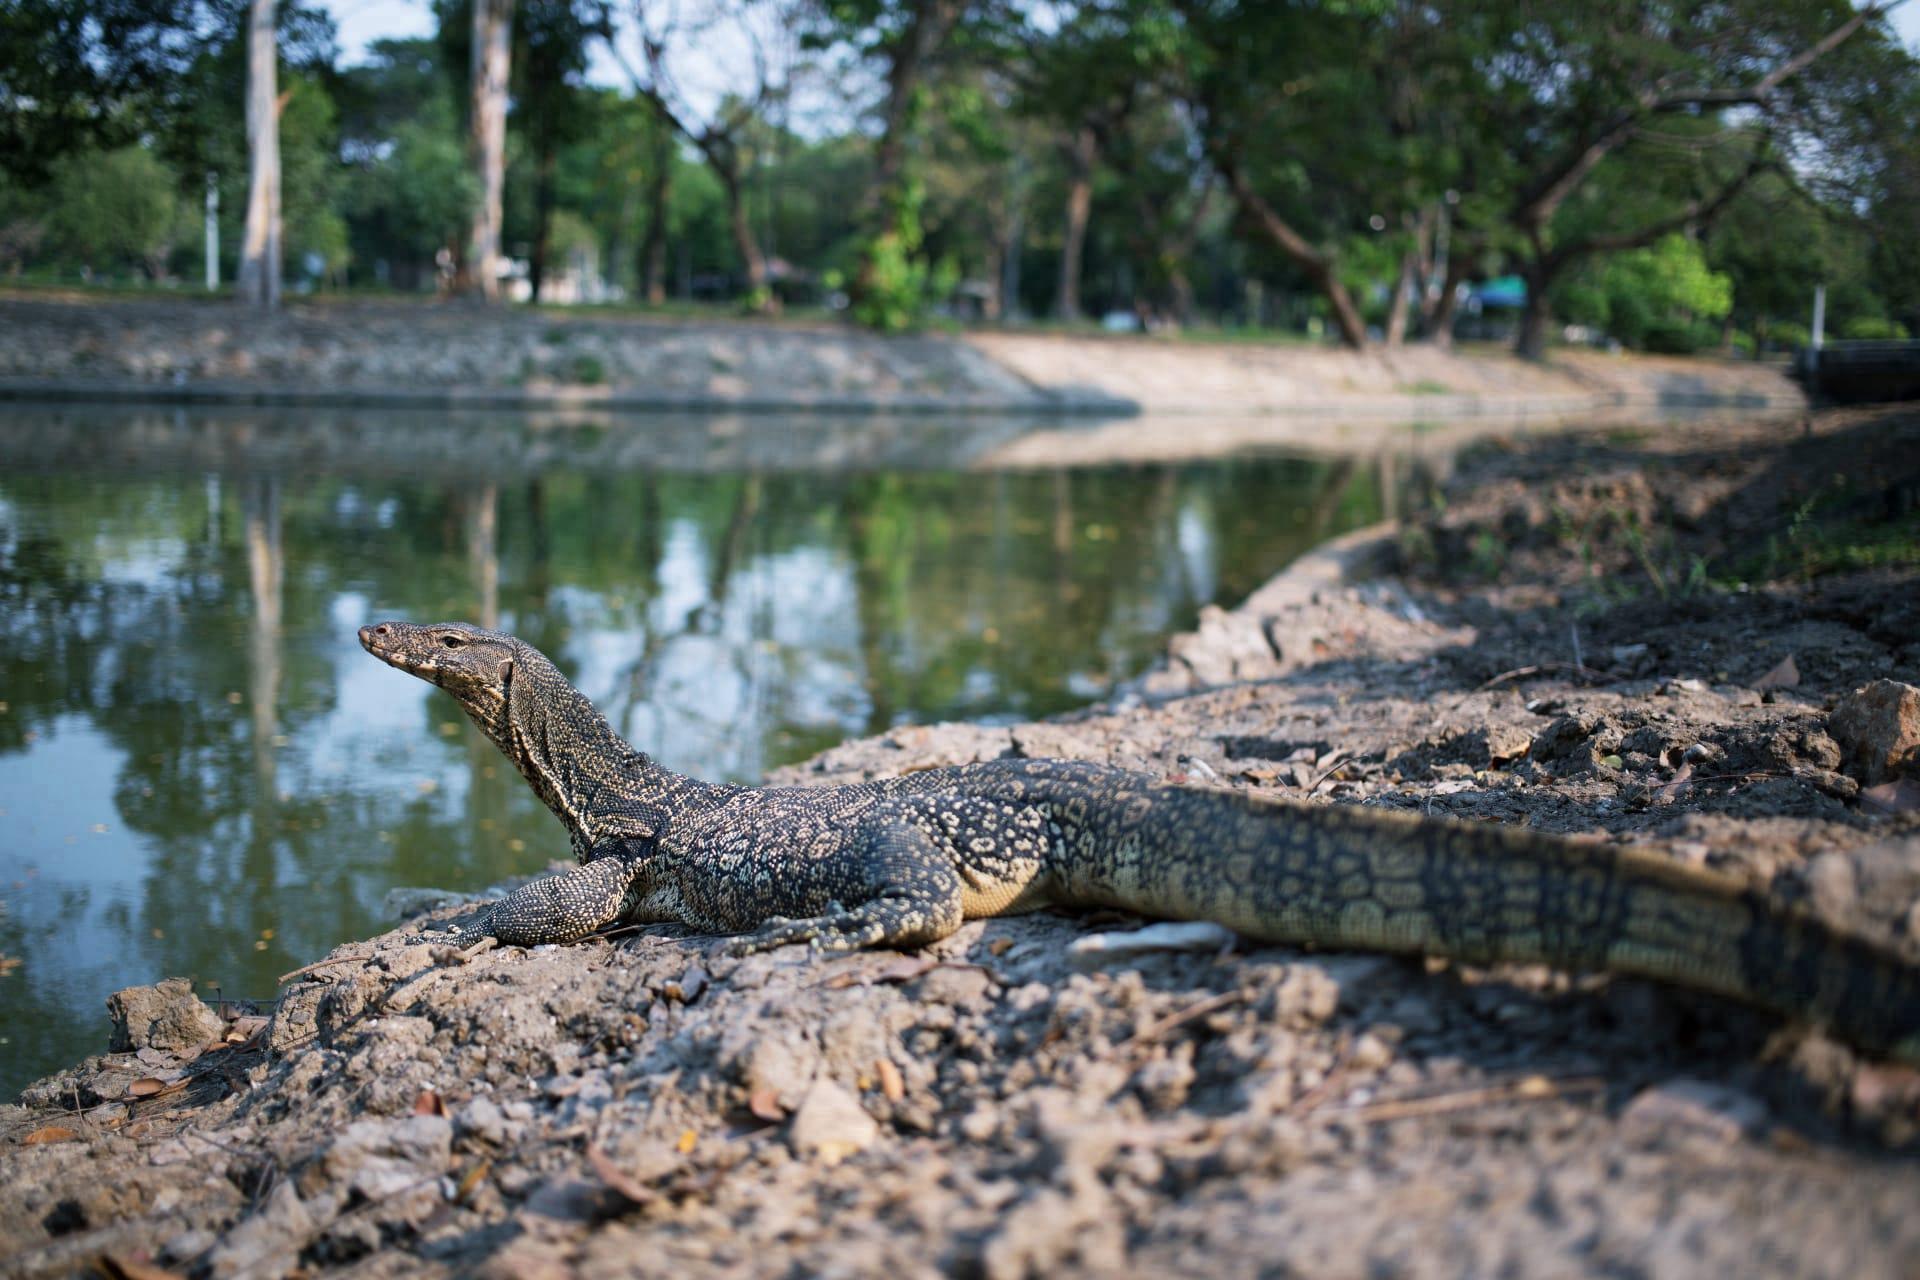 Monitor lizard pictures